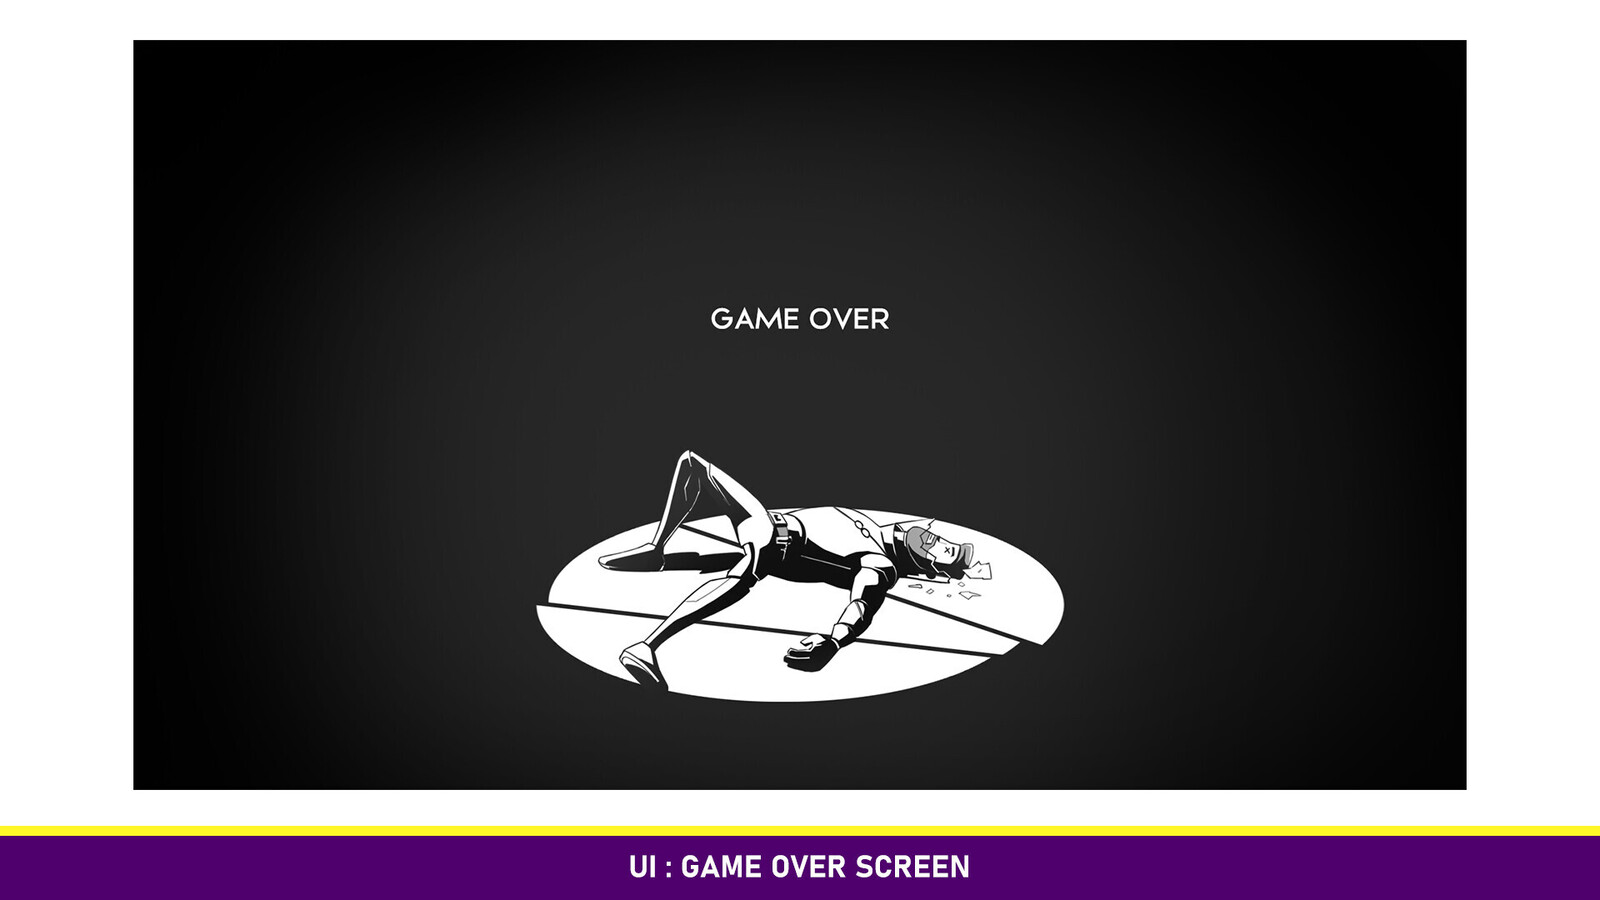 Our UI design collection for the game -Game Over screen

